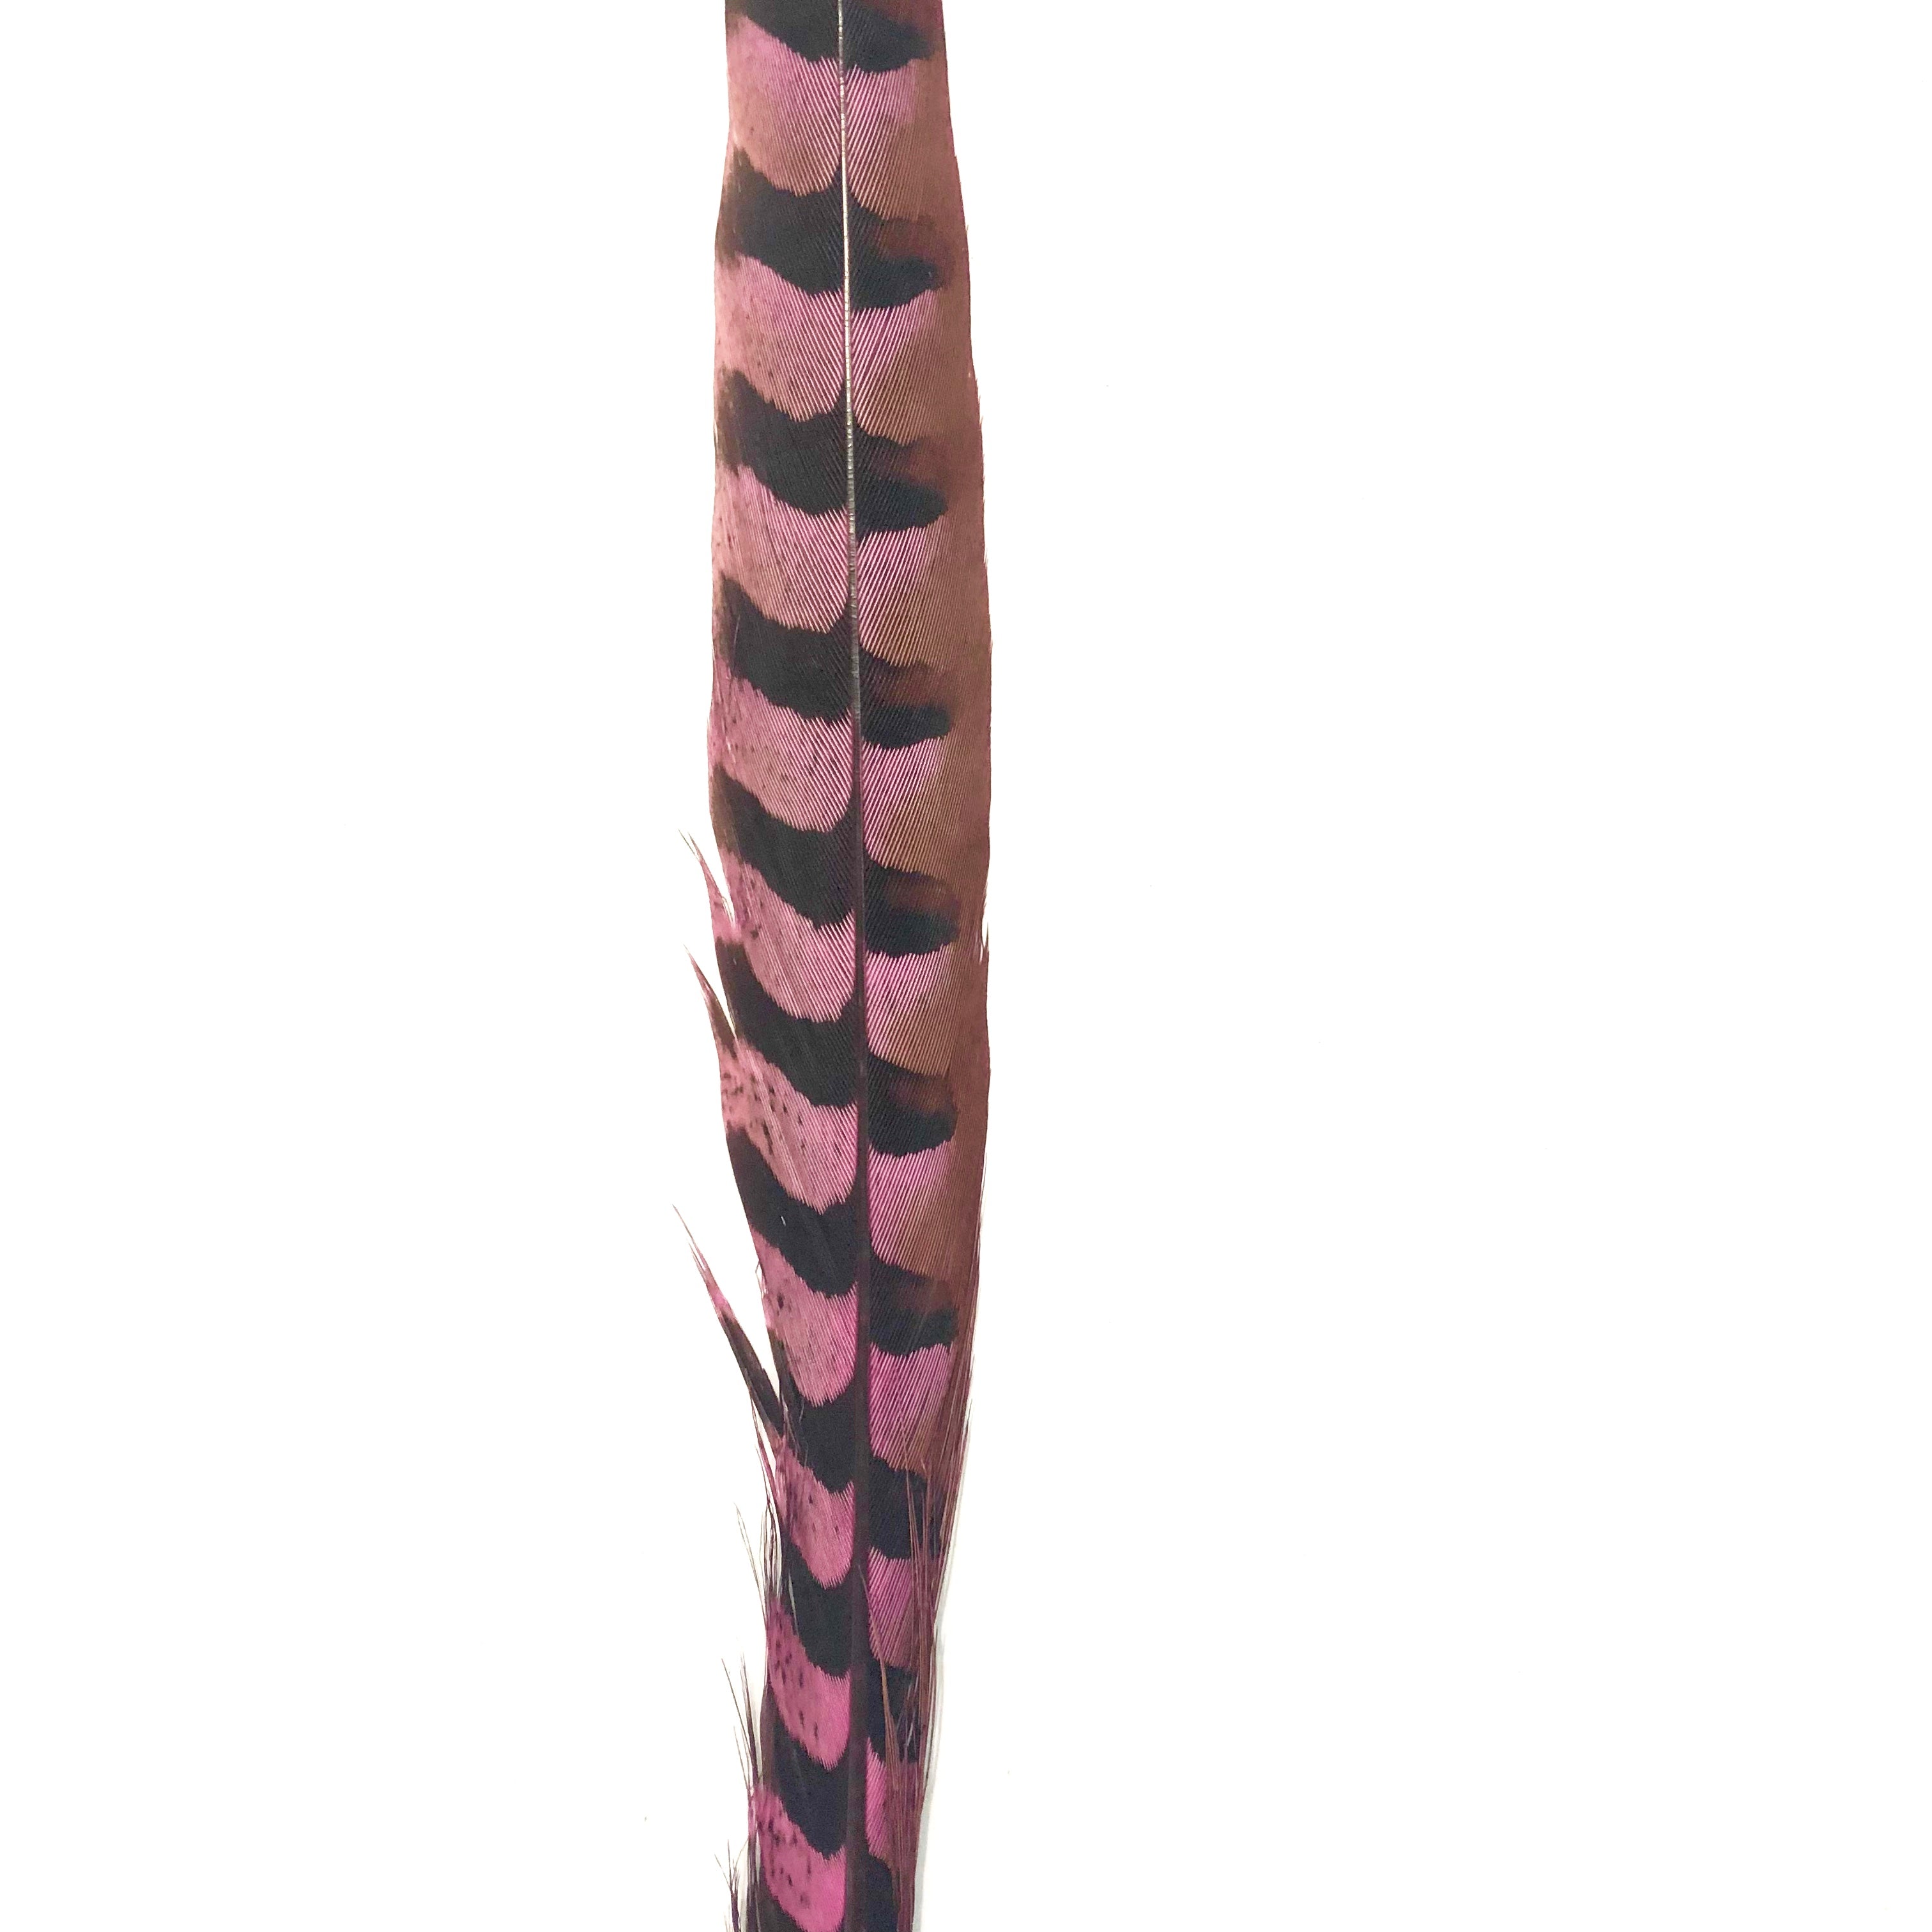 30" to 32" Reeves Pheasant Tail Feather - Hot Pink ((SECONDS))